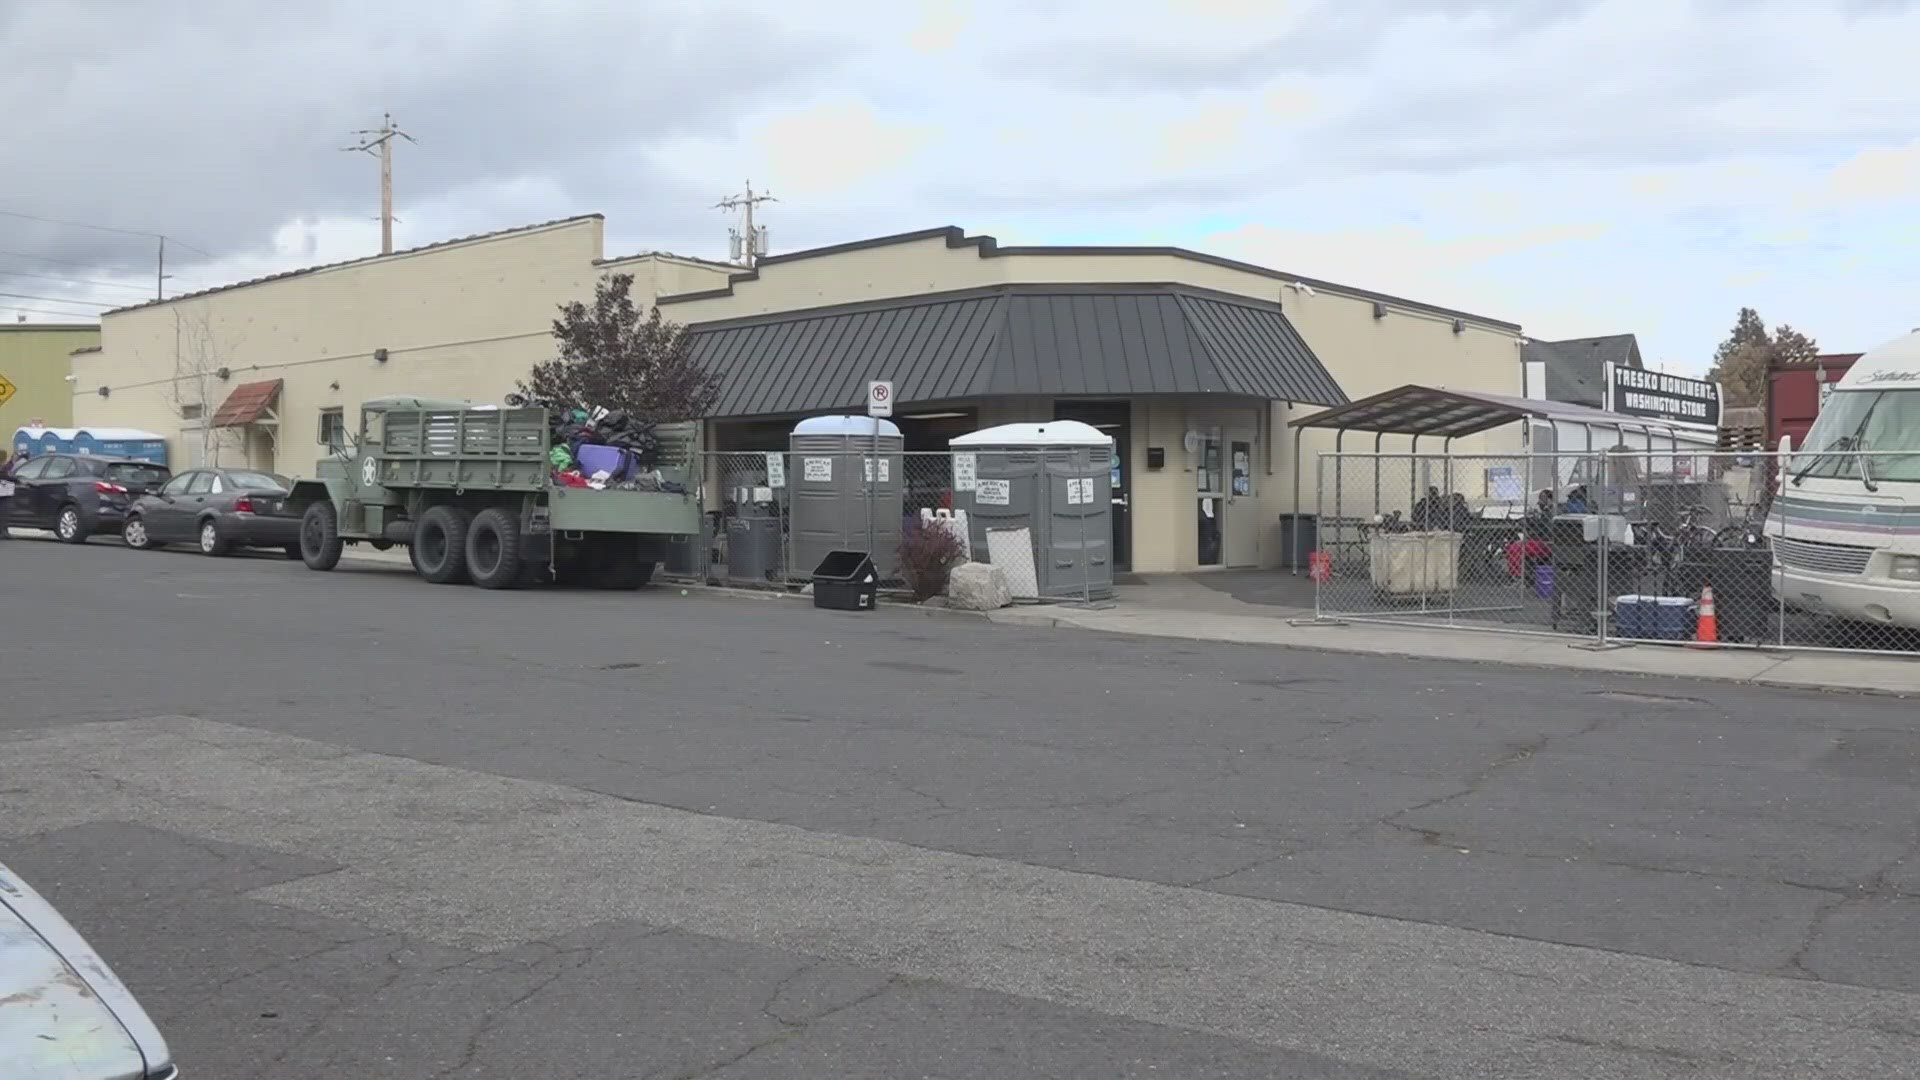 Spokane City Council says the current contract to operate the shelter as a drop-in shelter expires on May 31. This transition could be completed by June 2023.